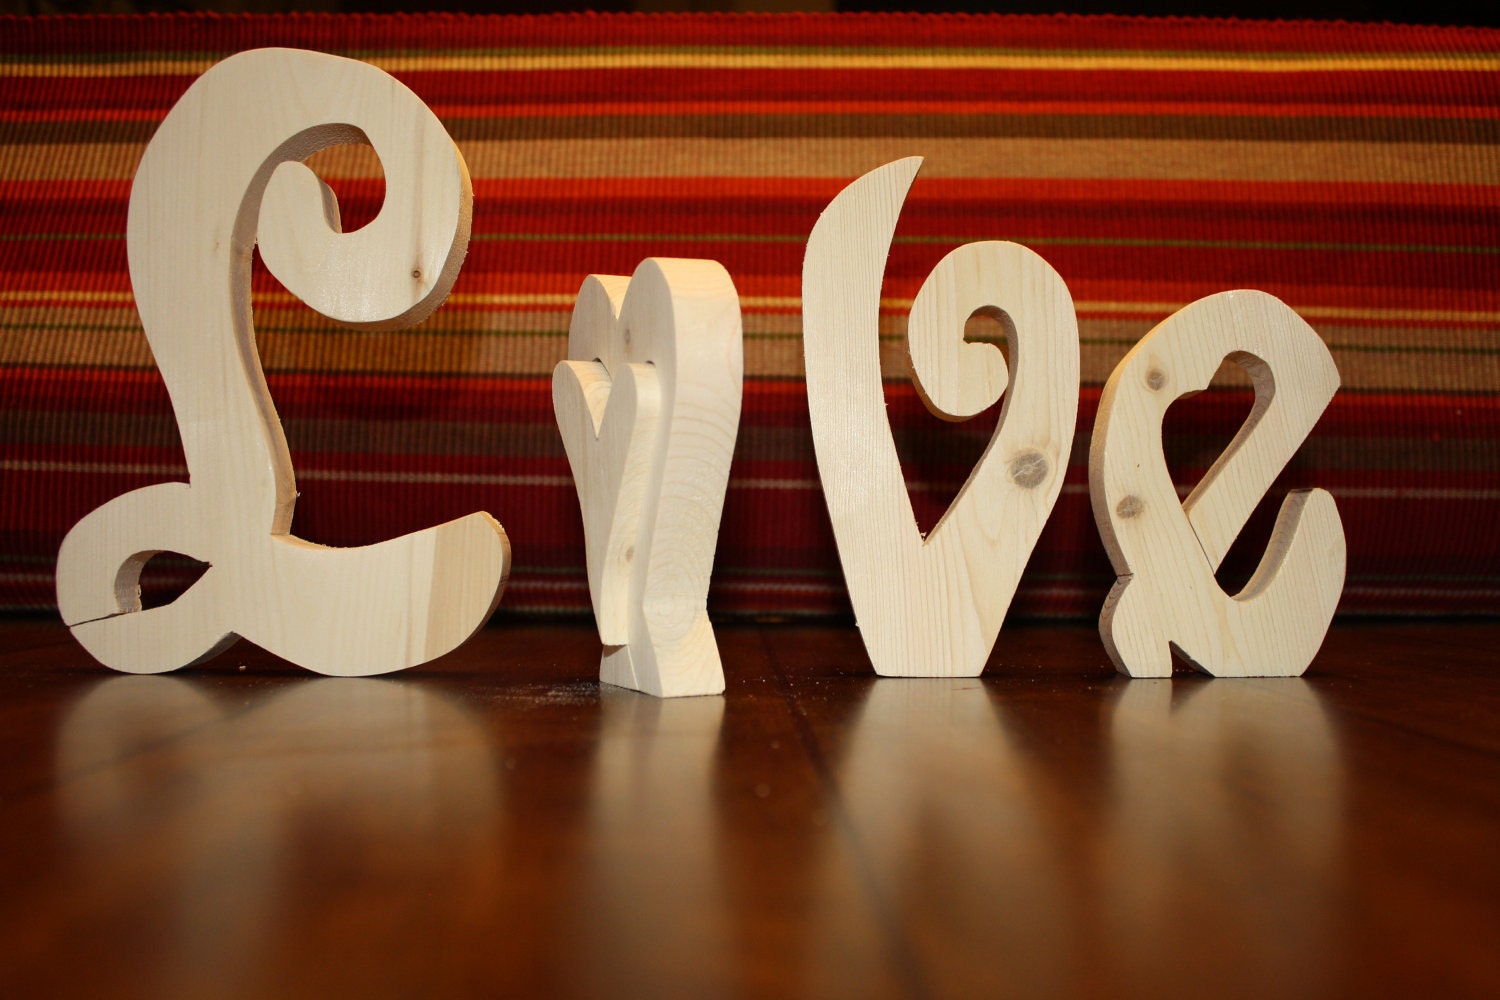 UNFINISHED  LOVE wood letters for Valentine's Day